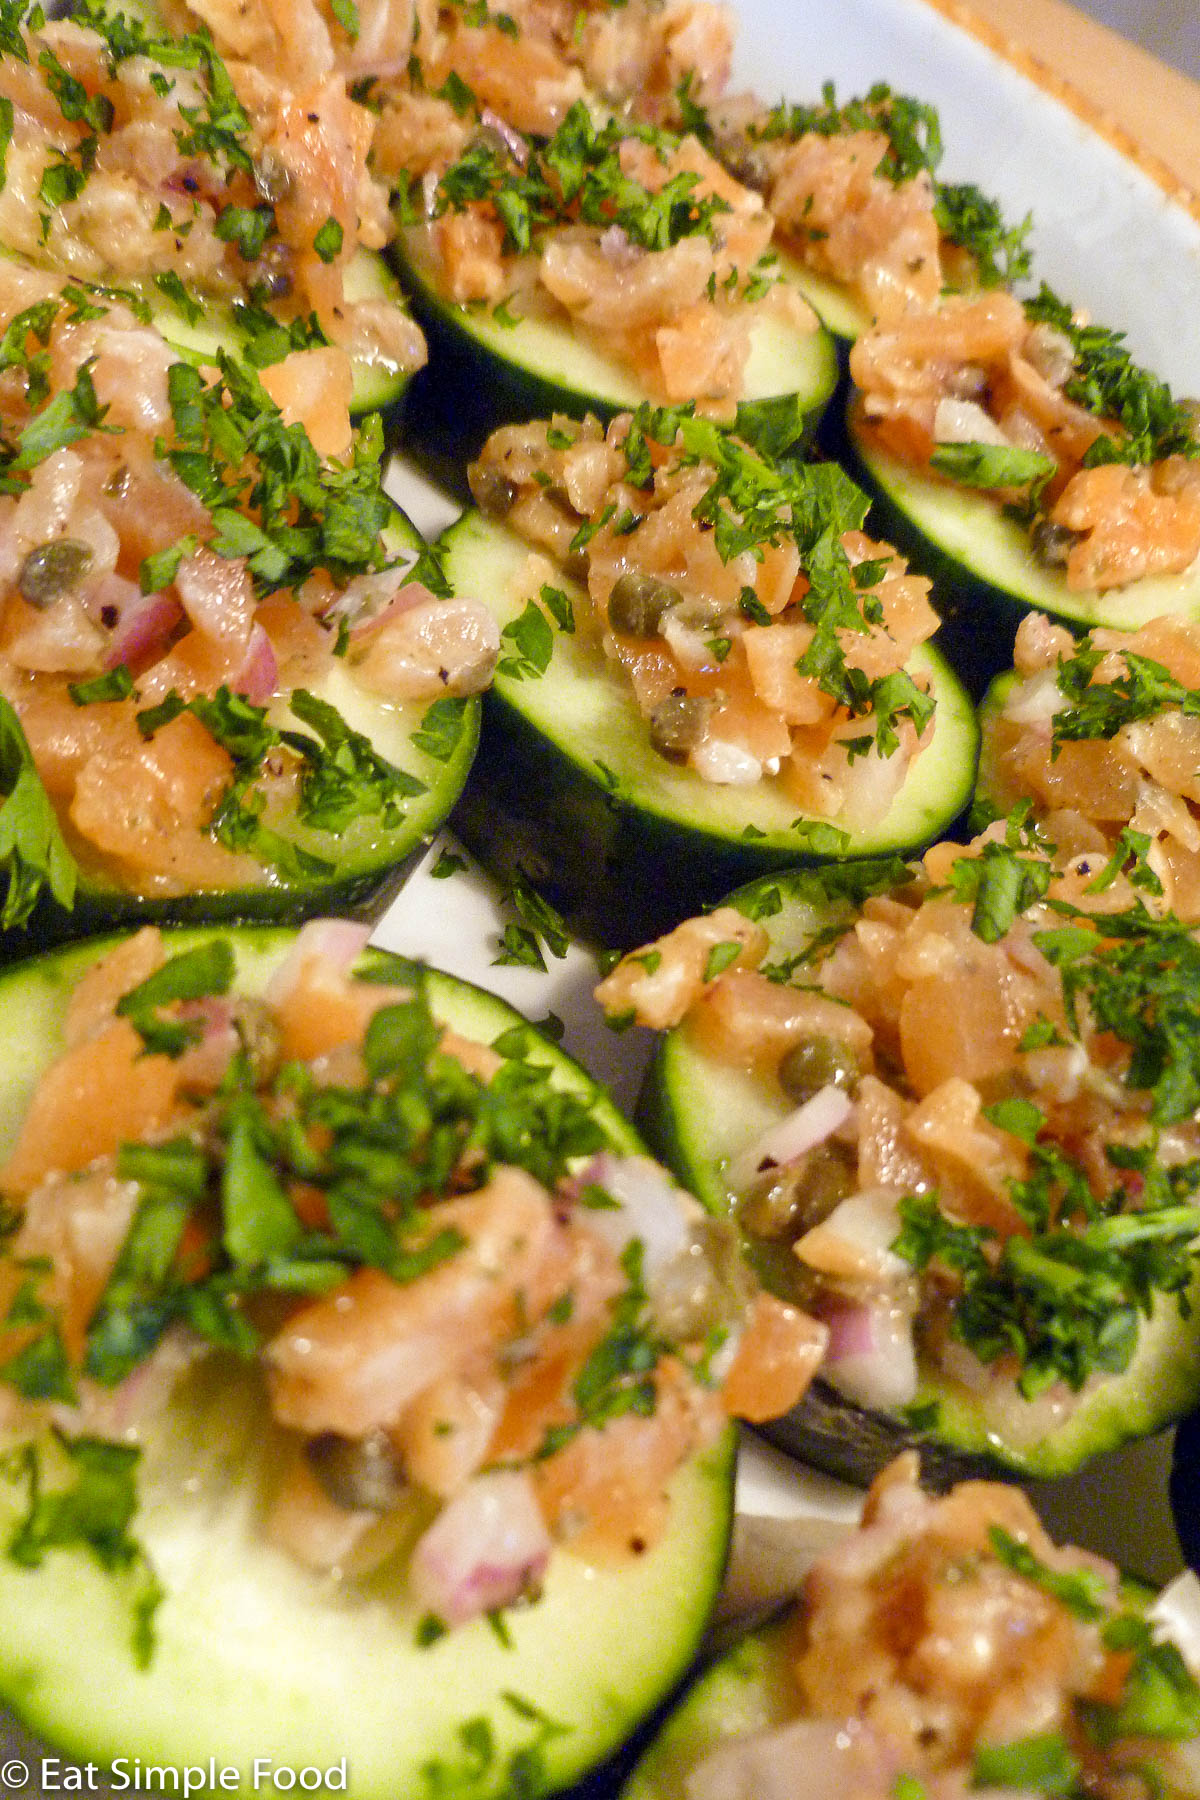 Smoked Salmon Cucumber Rounds With Capers, Red onions, dill, mustard and a Parsley Garnish | EatSimpleFood.com